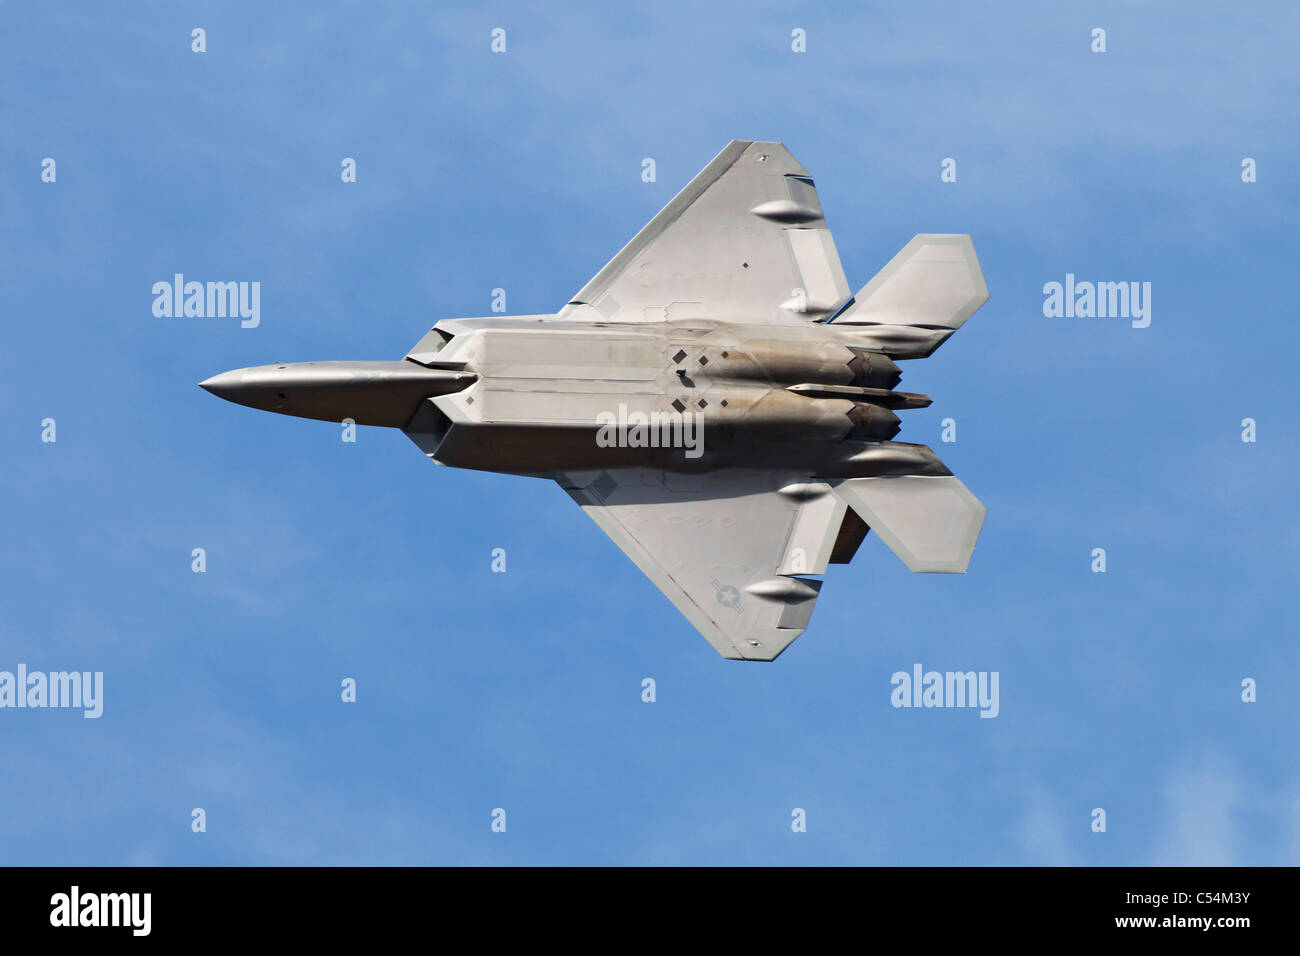 A Lockheed/ Martin F22 Raptor fighter aircraft of the USAF Stock Photo